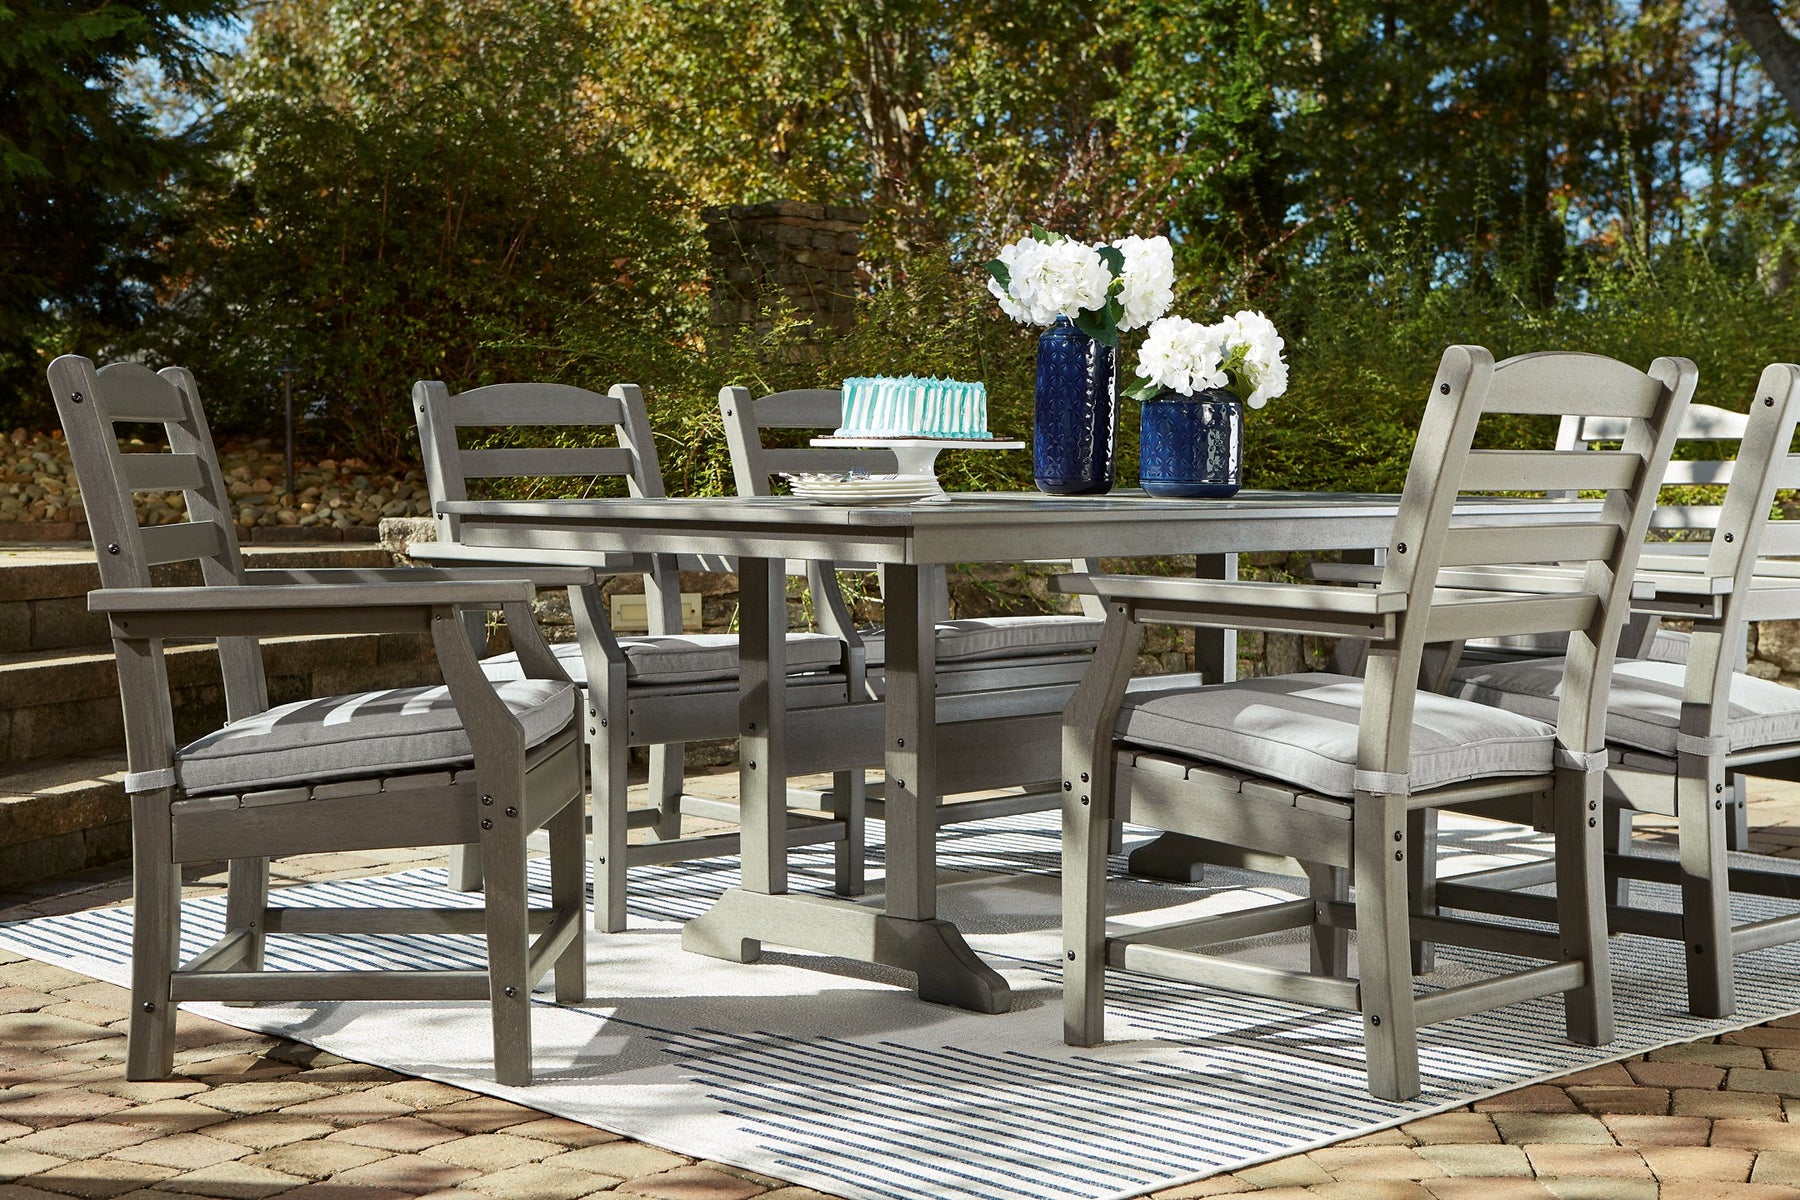 Visola Outdoor Dining Table - Half Price Furniture